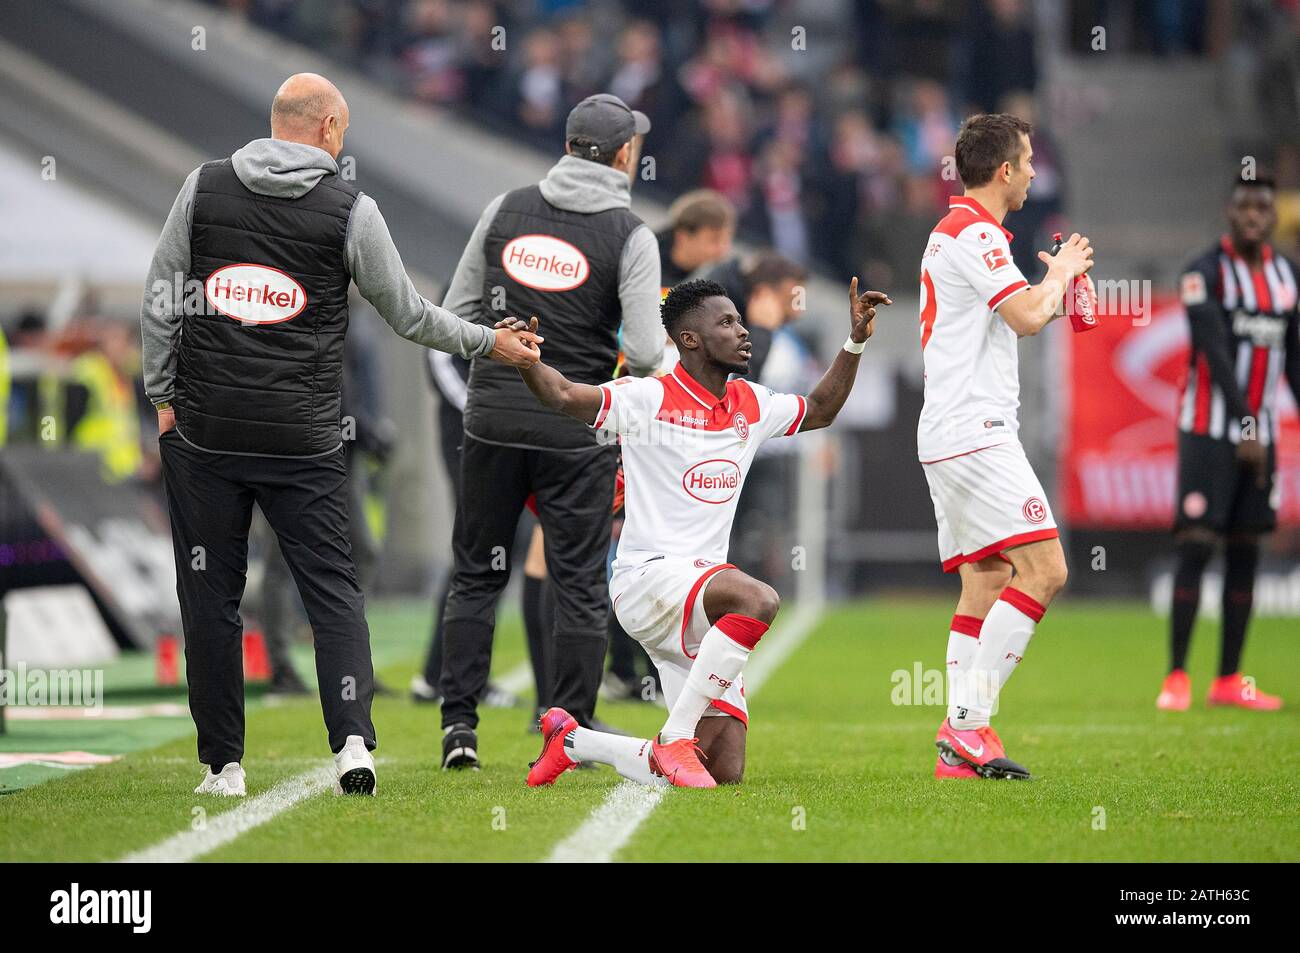 jubilation Opoku 'Nana' AMPOMAH withte (D) after his goal, which is withdrawn by video evidence, l. coach Uwe ROESLER (Rv? sler) (D) Soccer 1.Bundesliga, 20.matchday, Fortuna Dusseldorf (D) - Eintracht Frankfurt (F) 1: 1, on 01.02.2020 in Duesseldorf/Germany. ¬ | usage worldwide Stock Photo